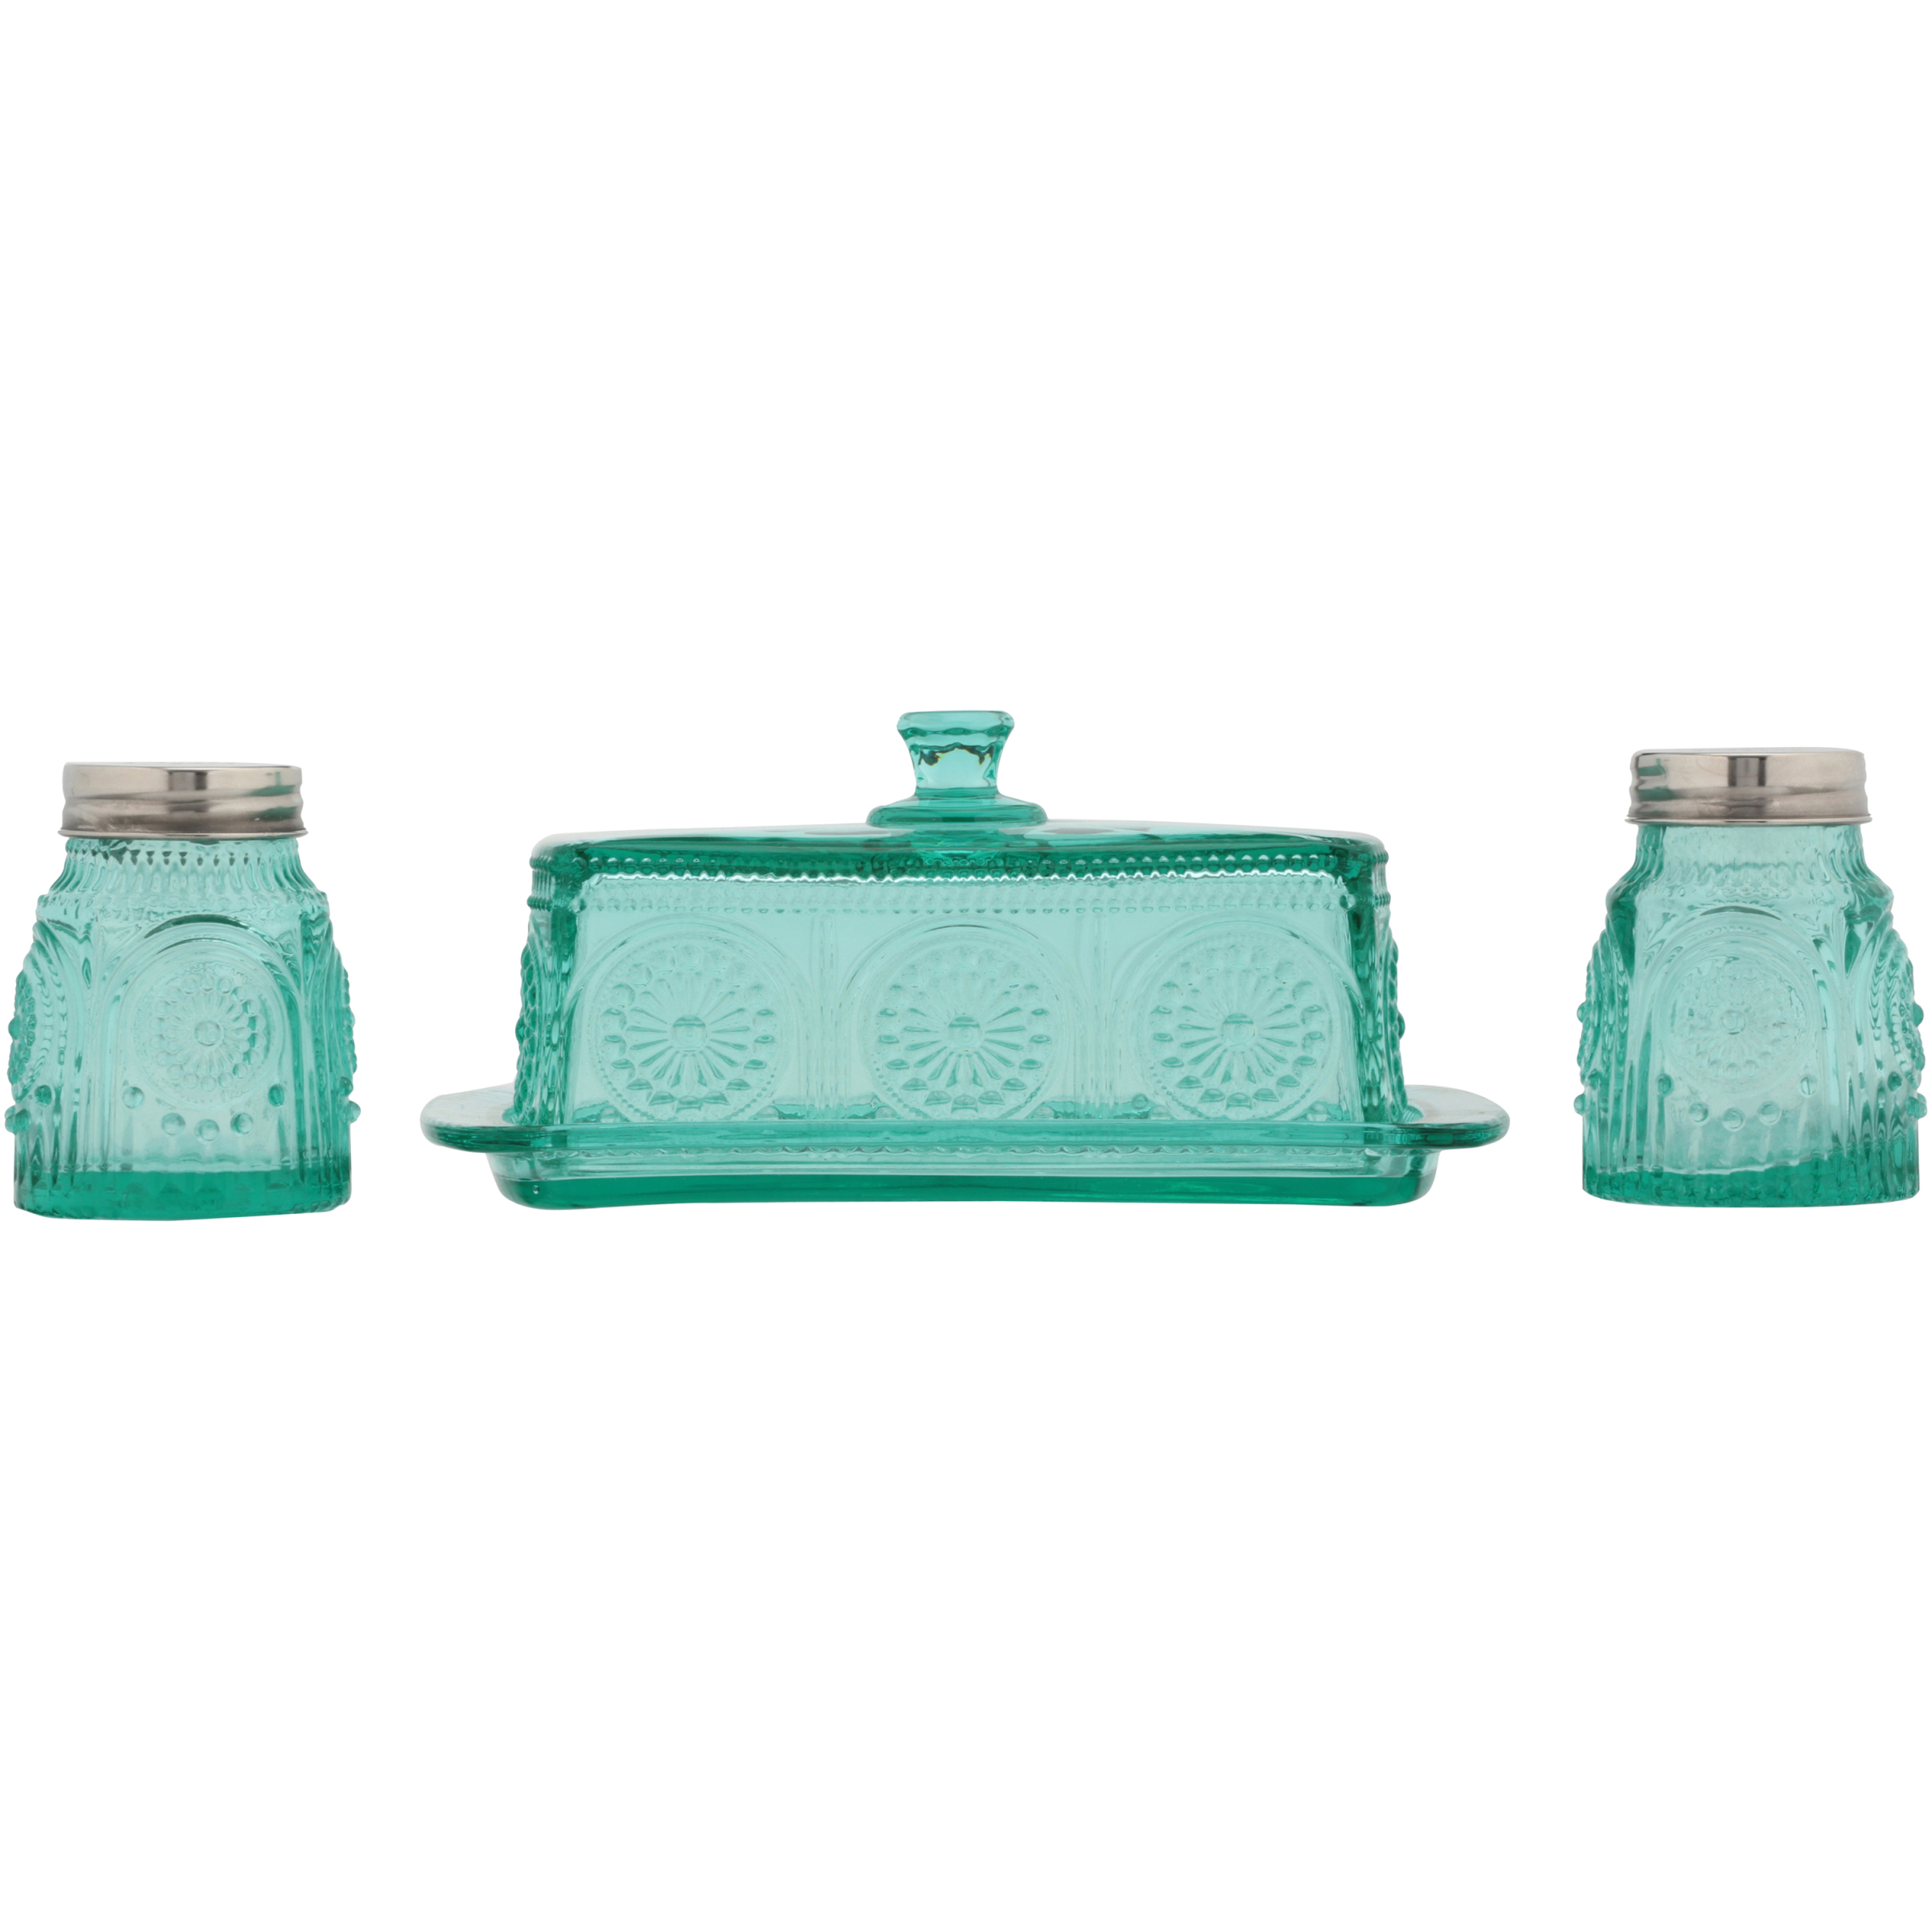 The Pioneer Woman Adeline Glass Butter Dish with Salt And Pepper Shaker Set - image 4 of 9